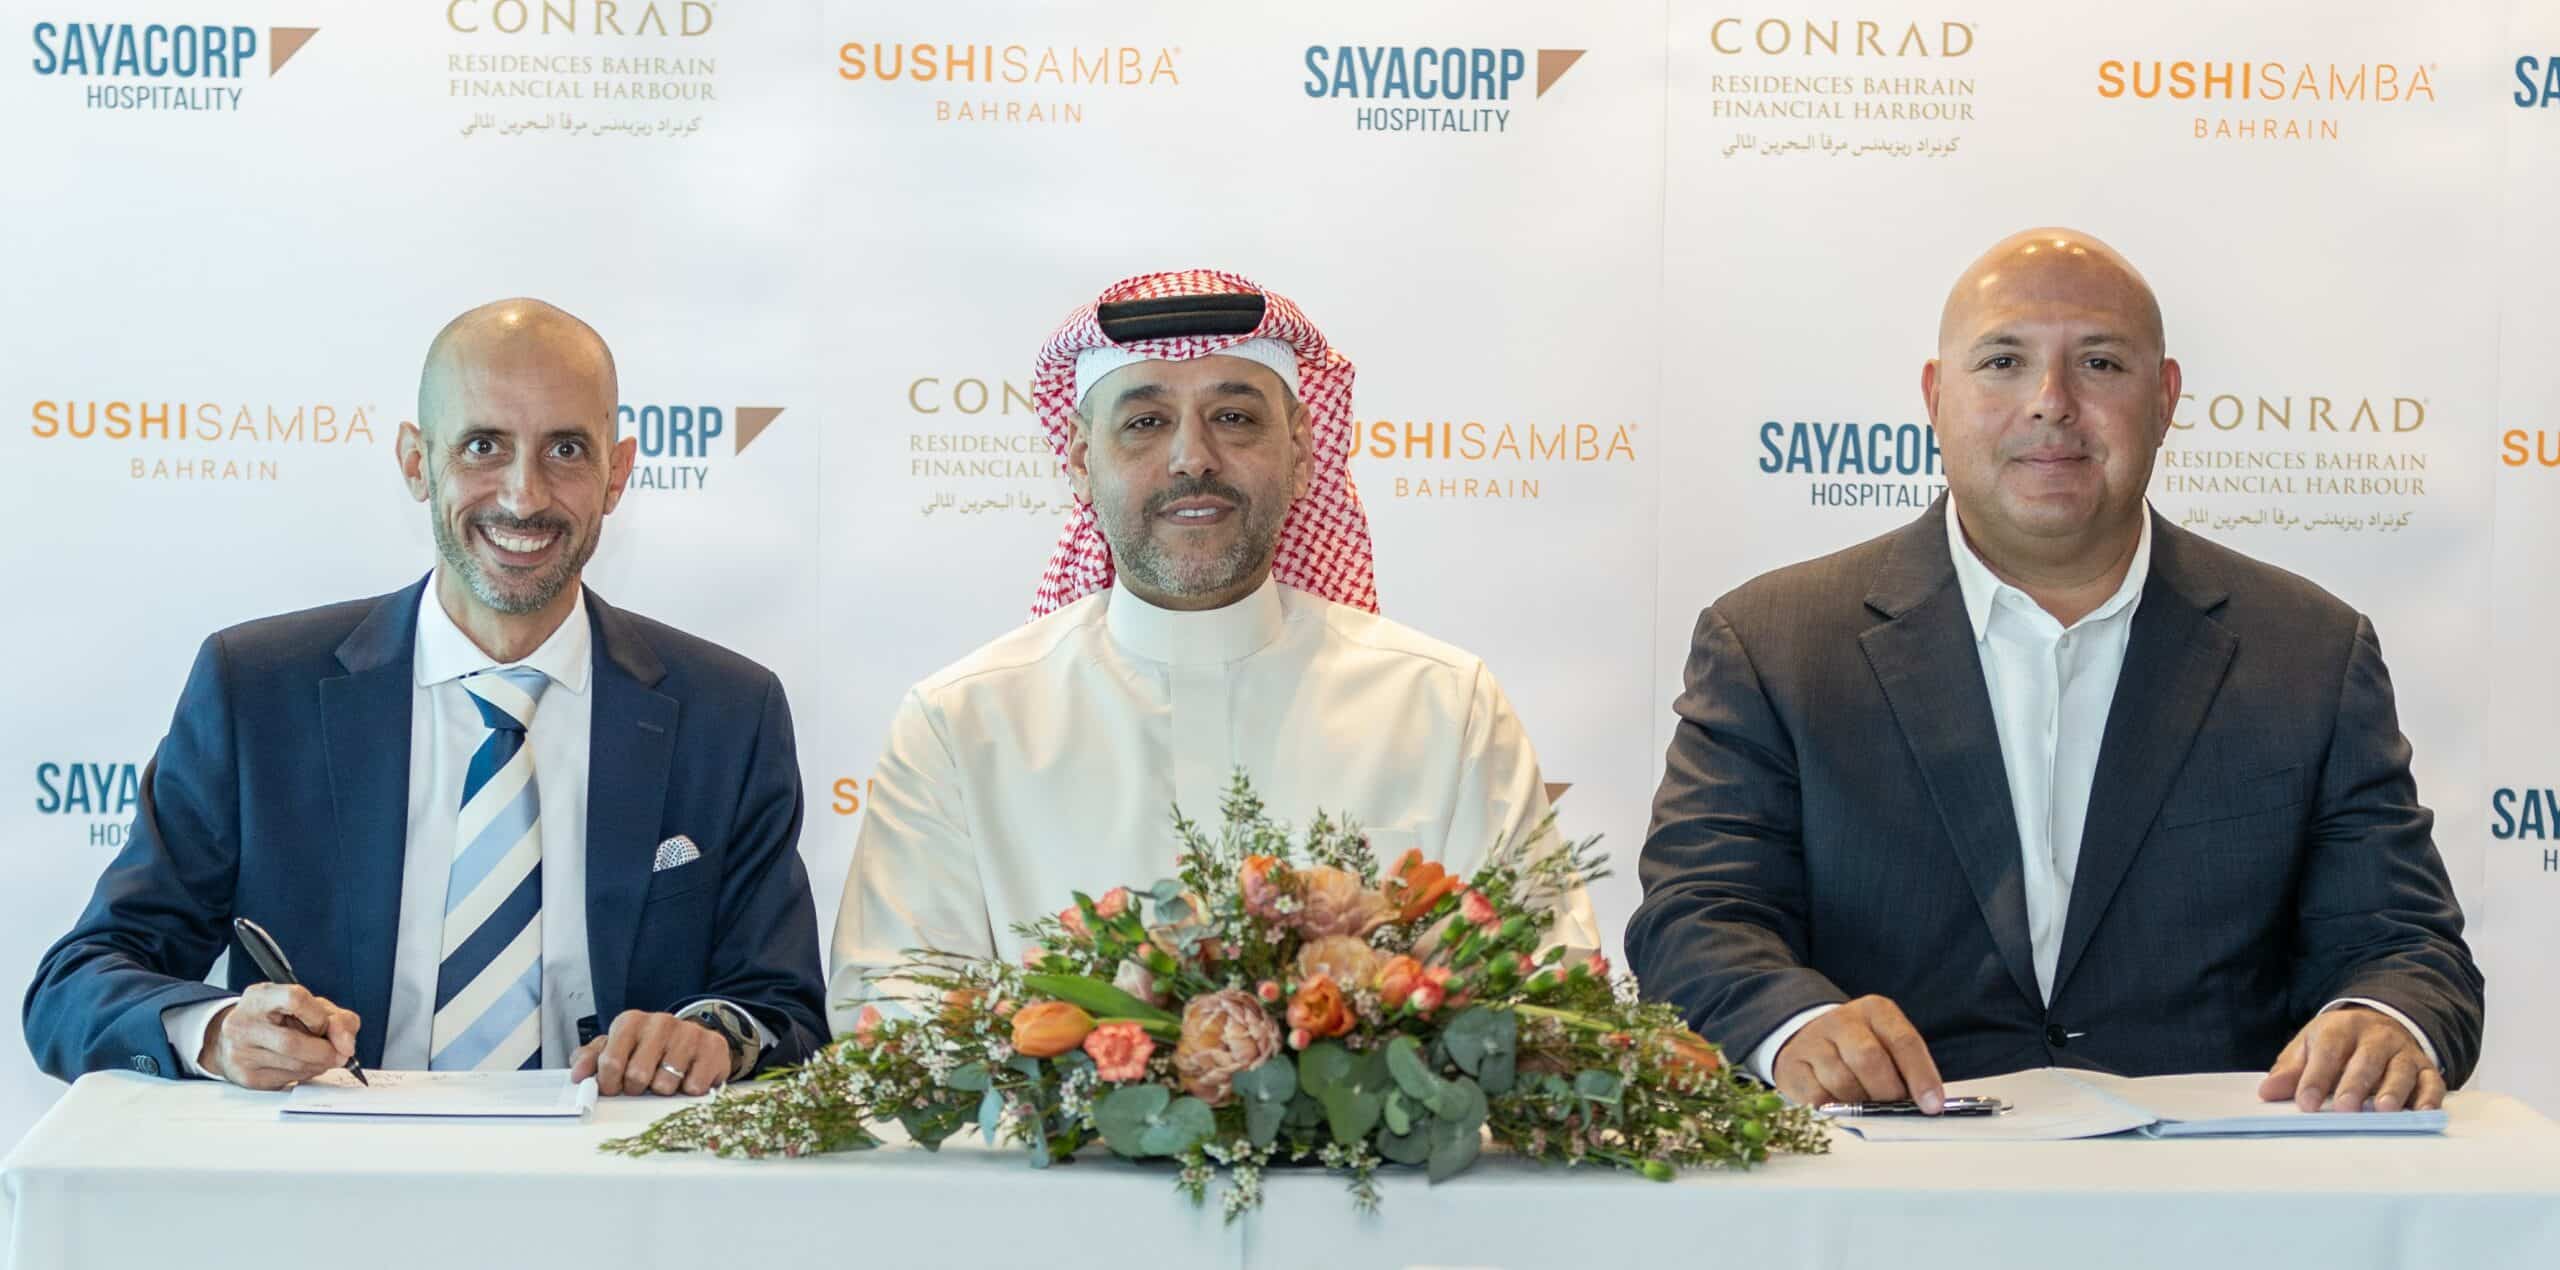 HILTON AND SAYACORP HOSPITALITY ANNOUNCE PLANS TO OPEN SUSHISAMBA IN DOWNTOWN BAHRAIN